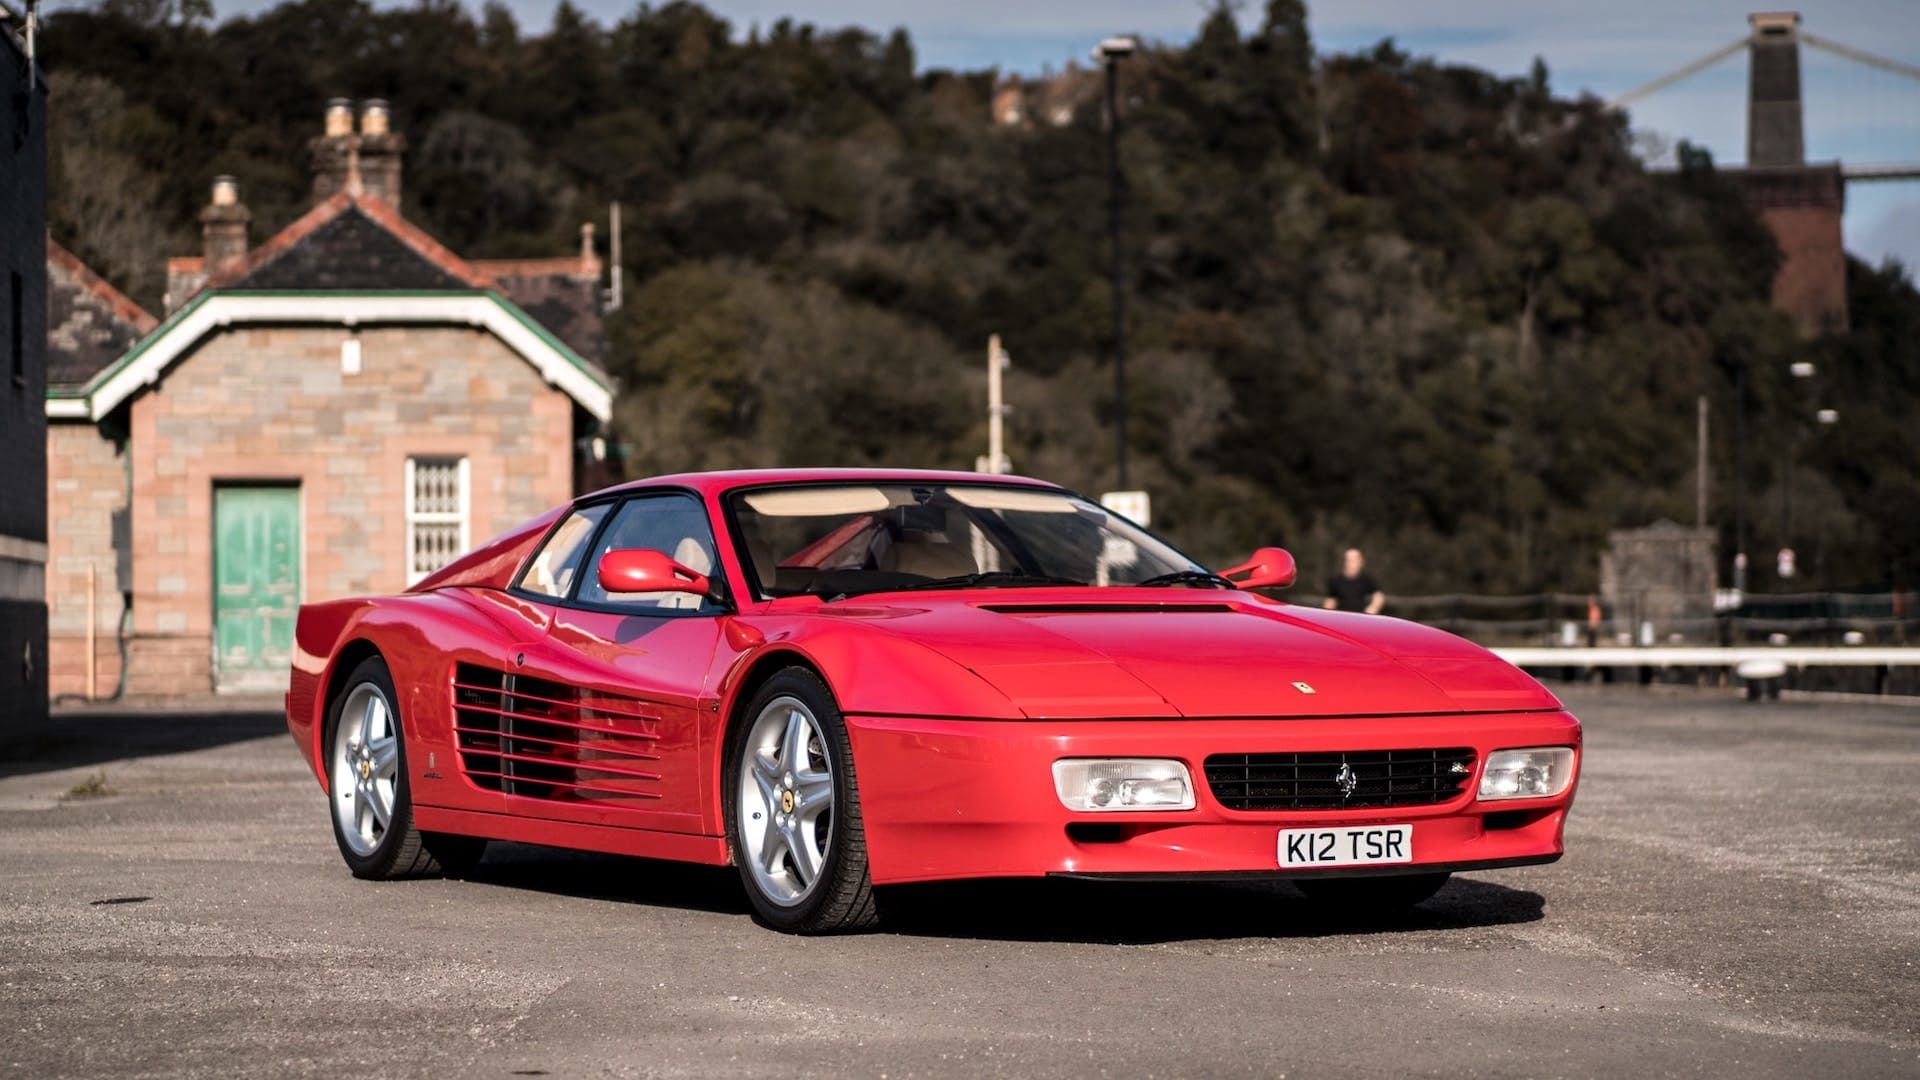 Top Gear star's classic Ferrari 512 TR up for auction